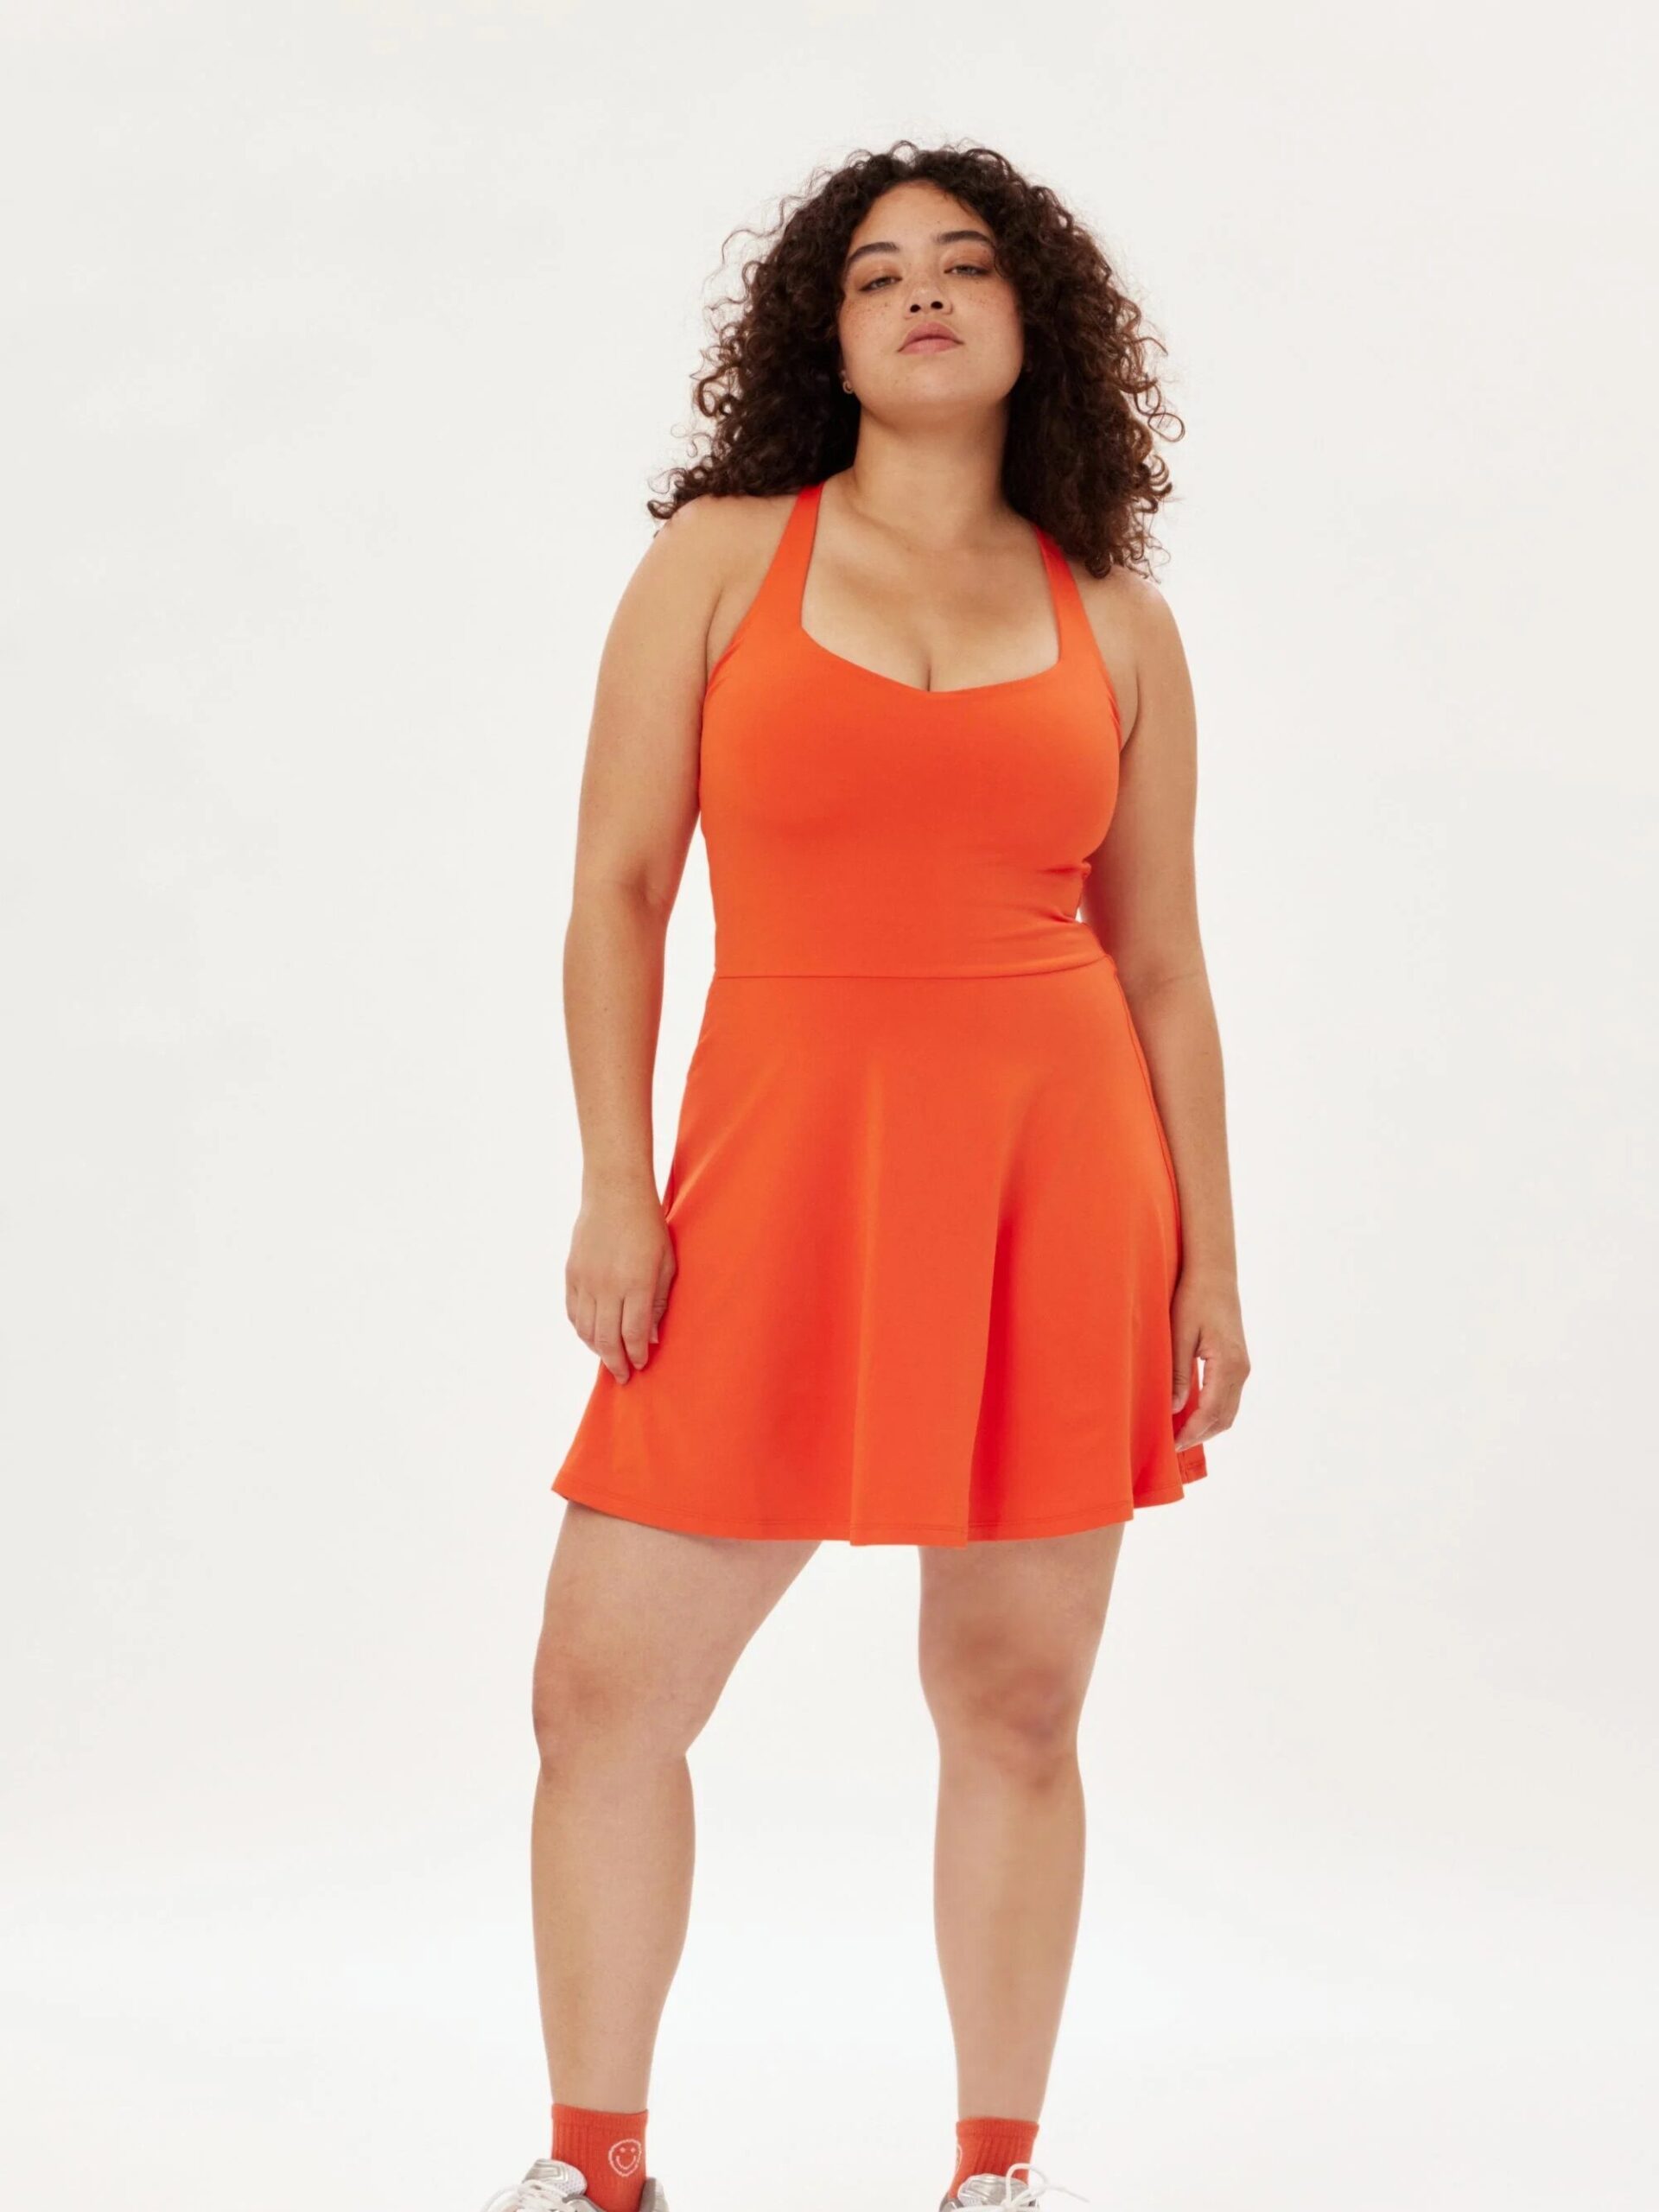 Woman in a bright orange tennis dress and white sneakers standing confidently against a plain background.